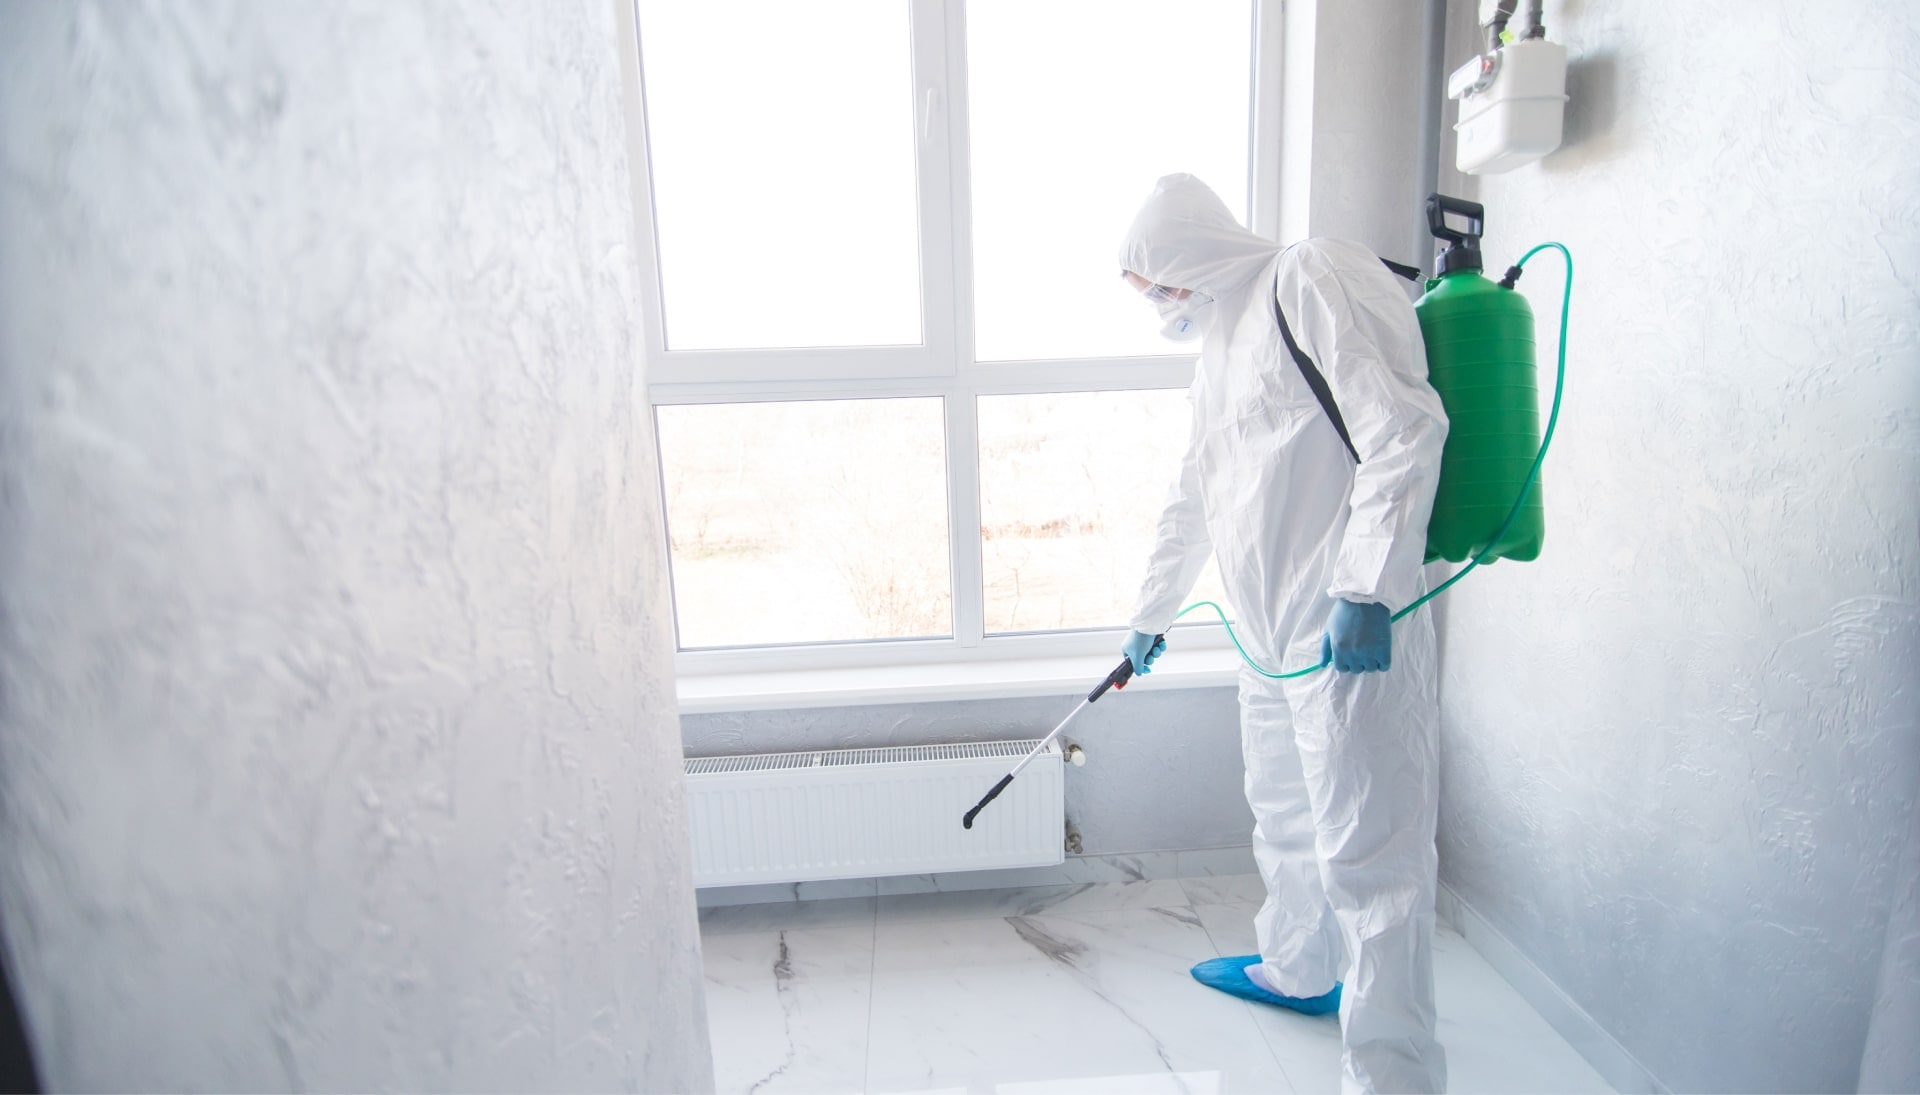 We provide the highest-quality mold inspection, testing, and removal services in the Portland, Oregon area.